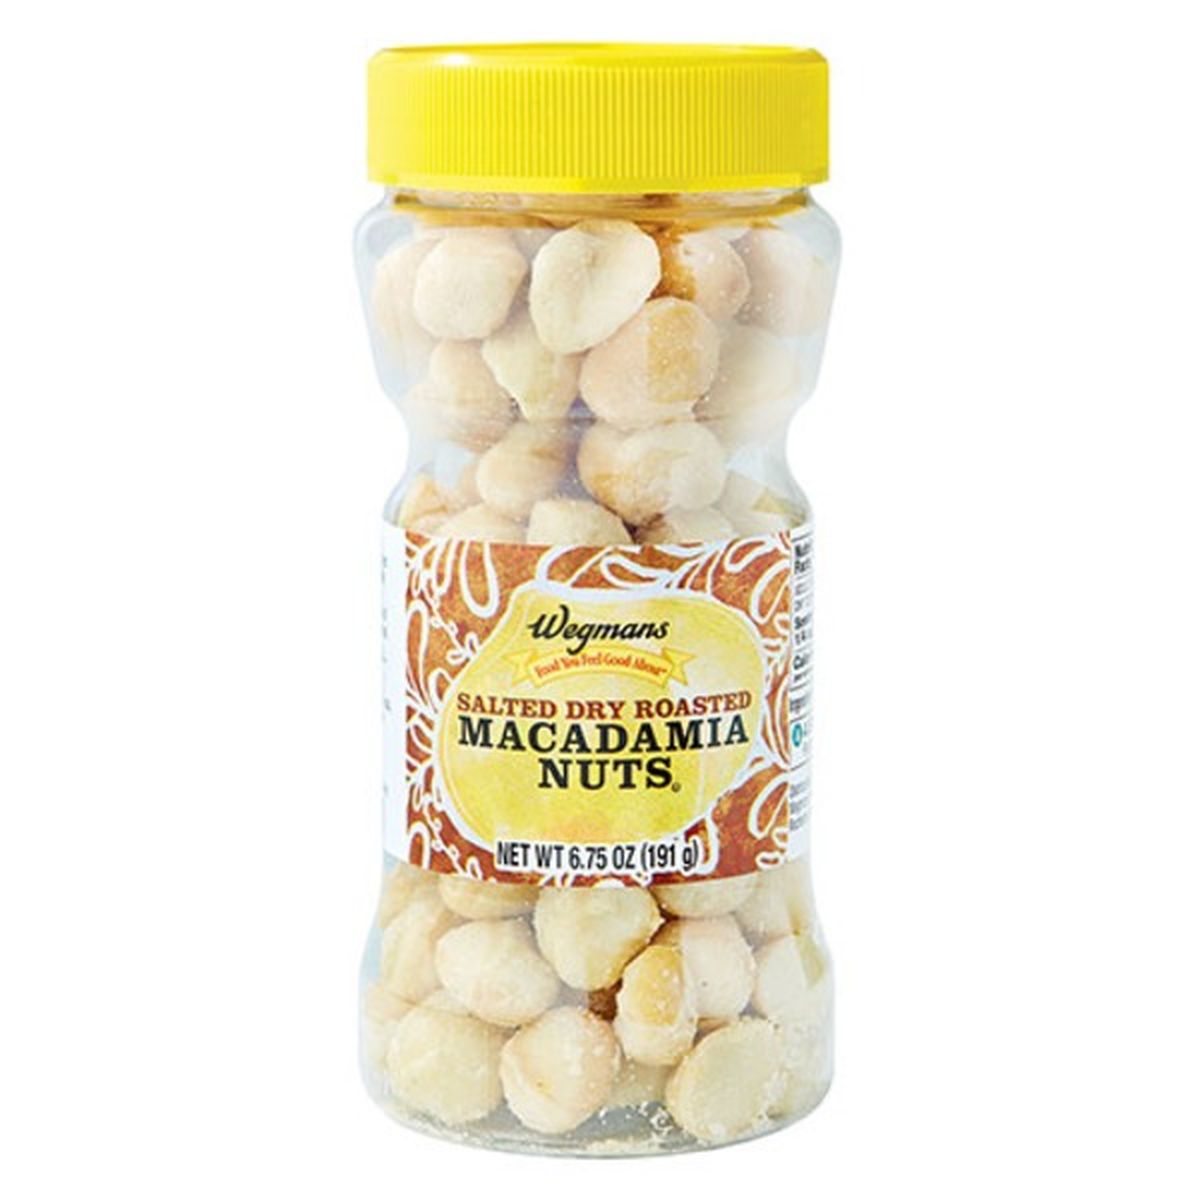 Calories in Wegmans Salted Dry Roasted Macadamia Nuts